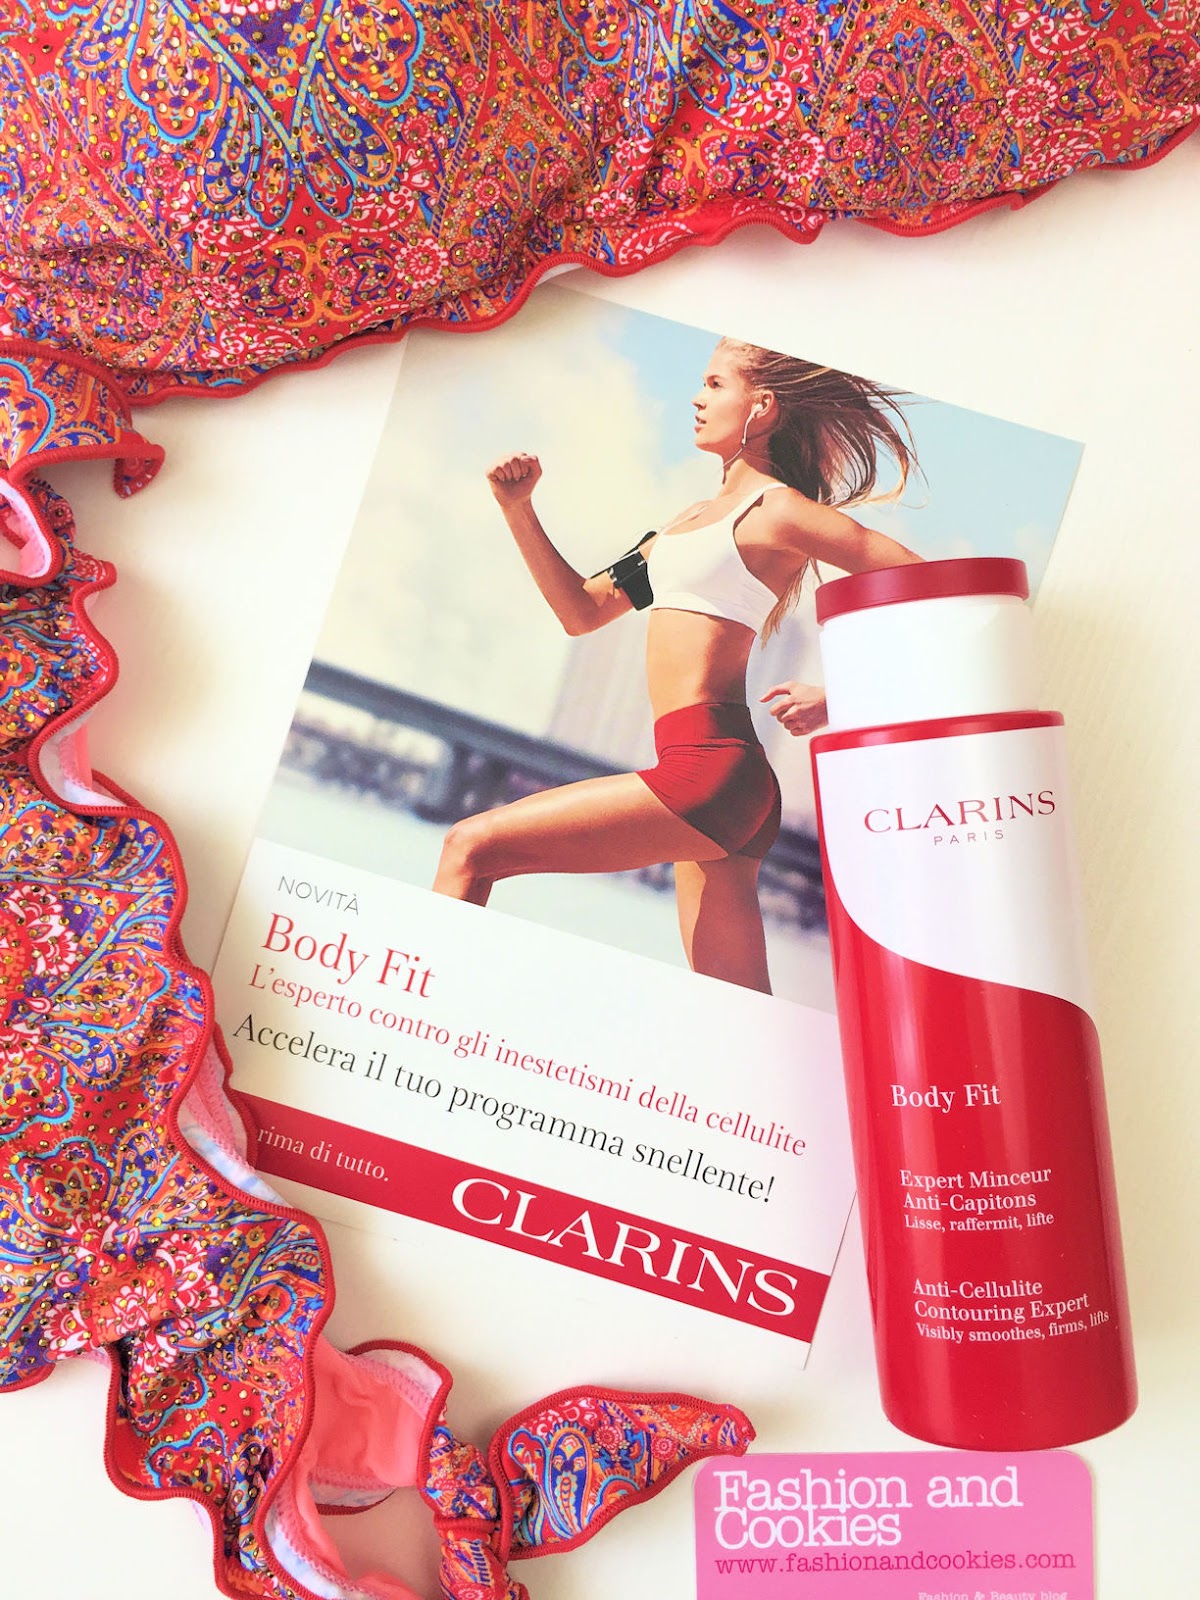 Come snellire rapidamente, review Clarins Body Fit anticellulite su Fashion and Cookies beauty blog, beauty blogger